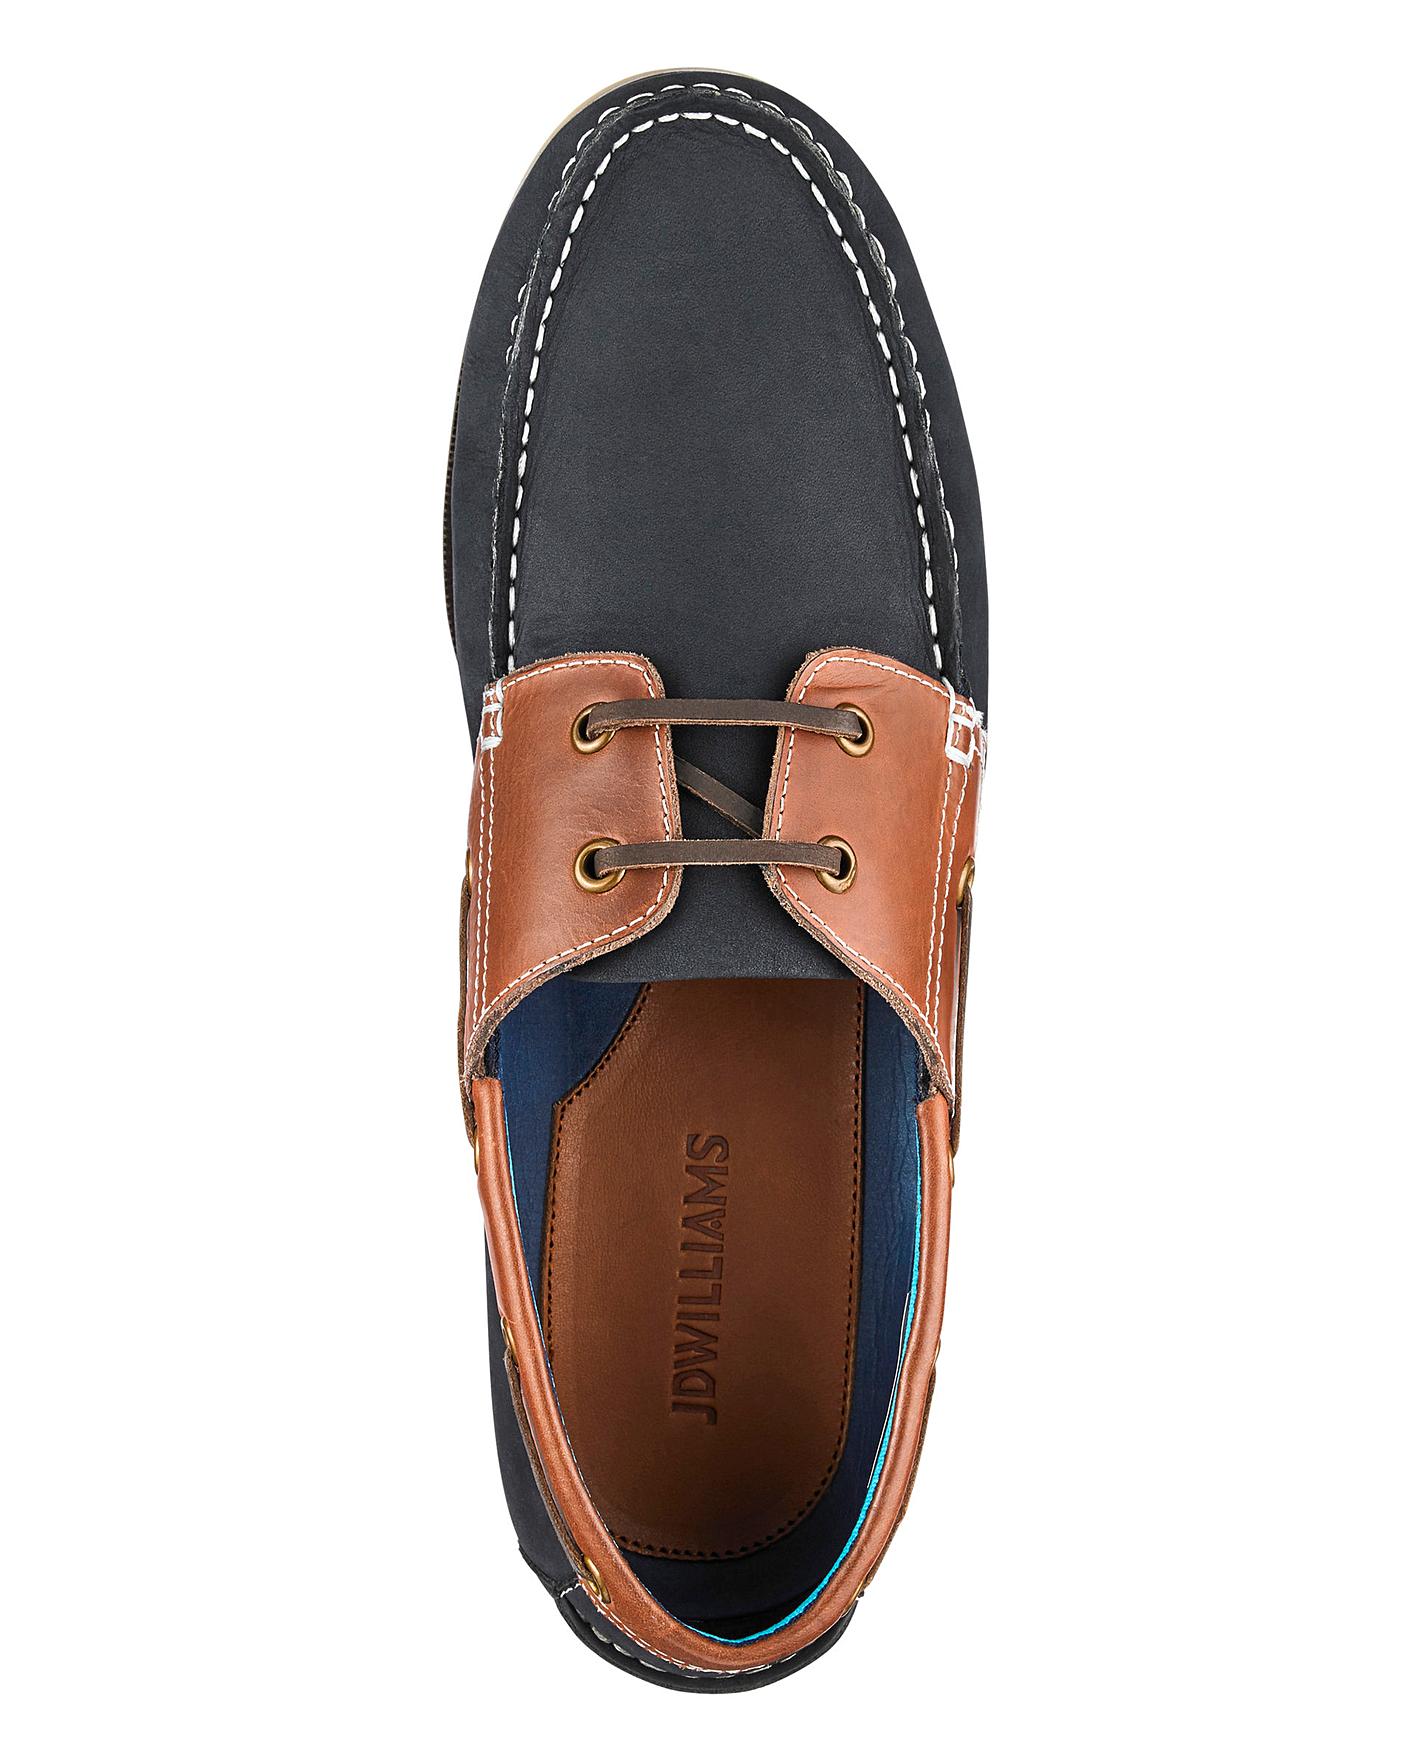 Leather Boat Shoes Wide Fit J D Williams